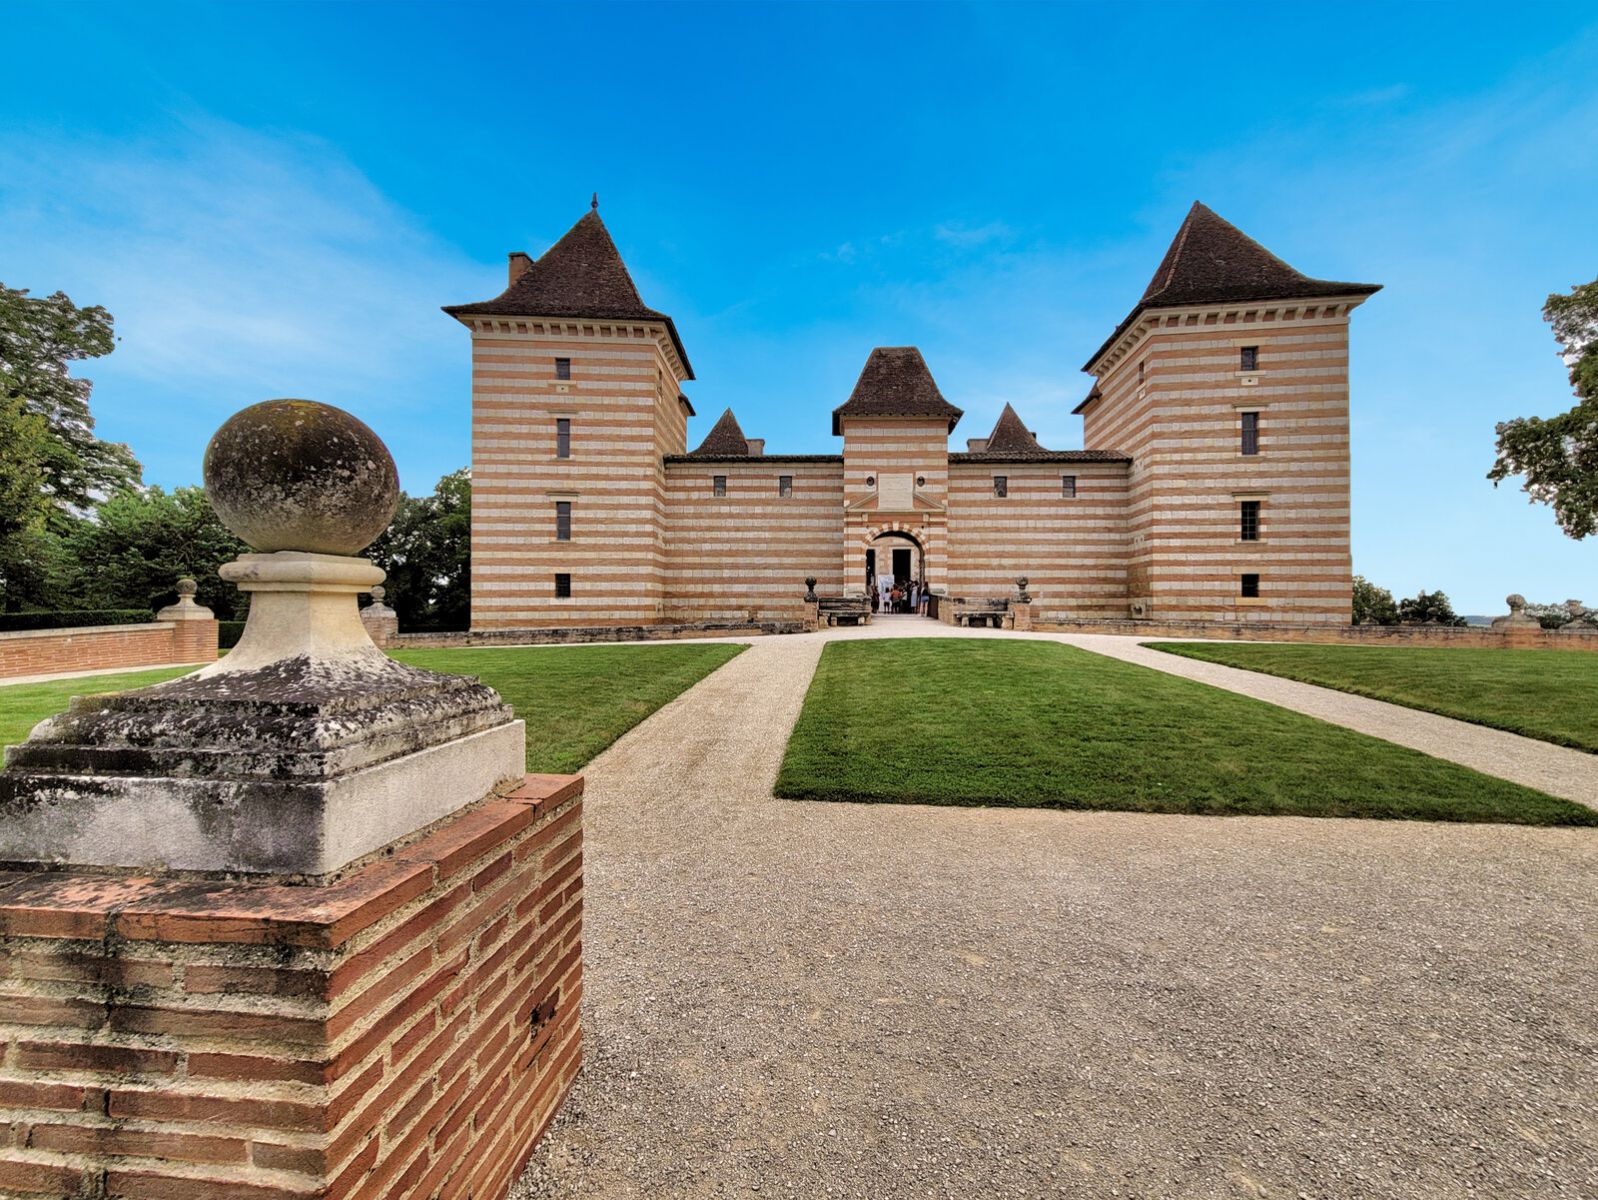 Travel back in time to the Castle of Laréole